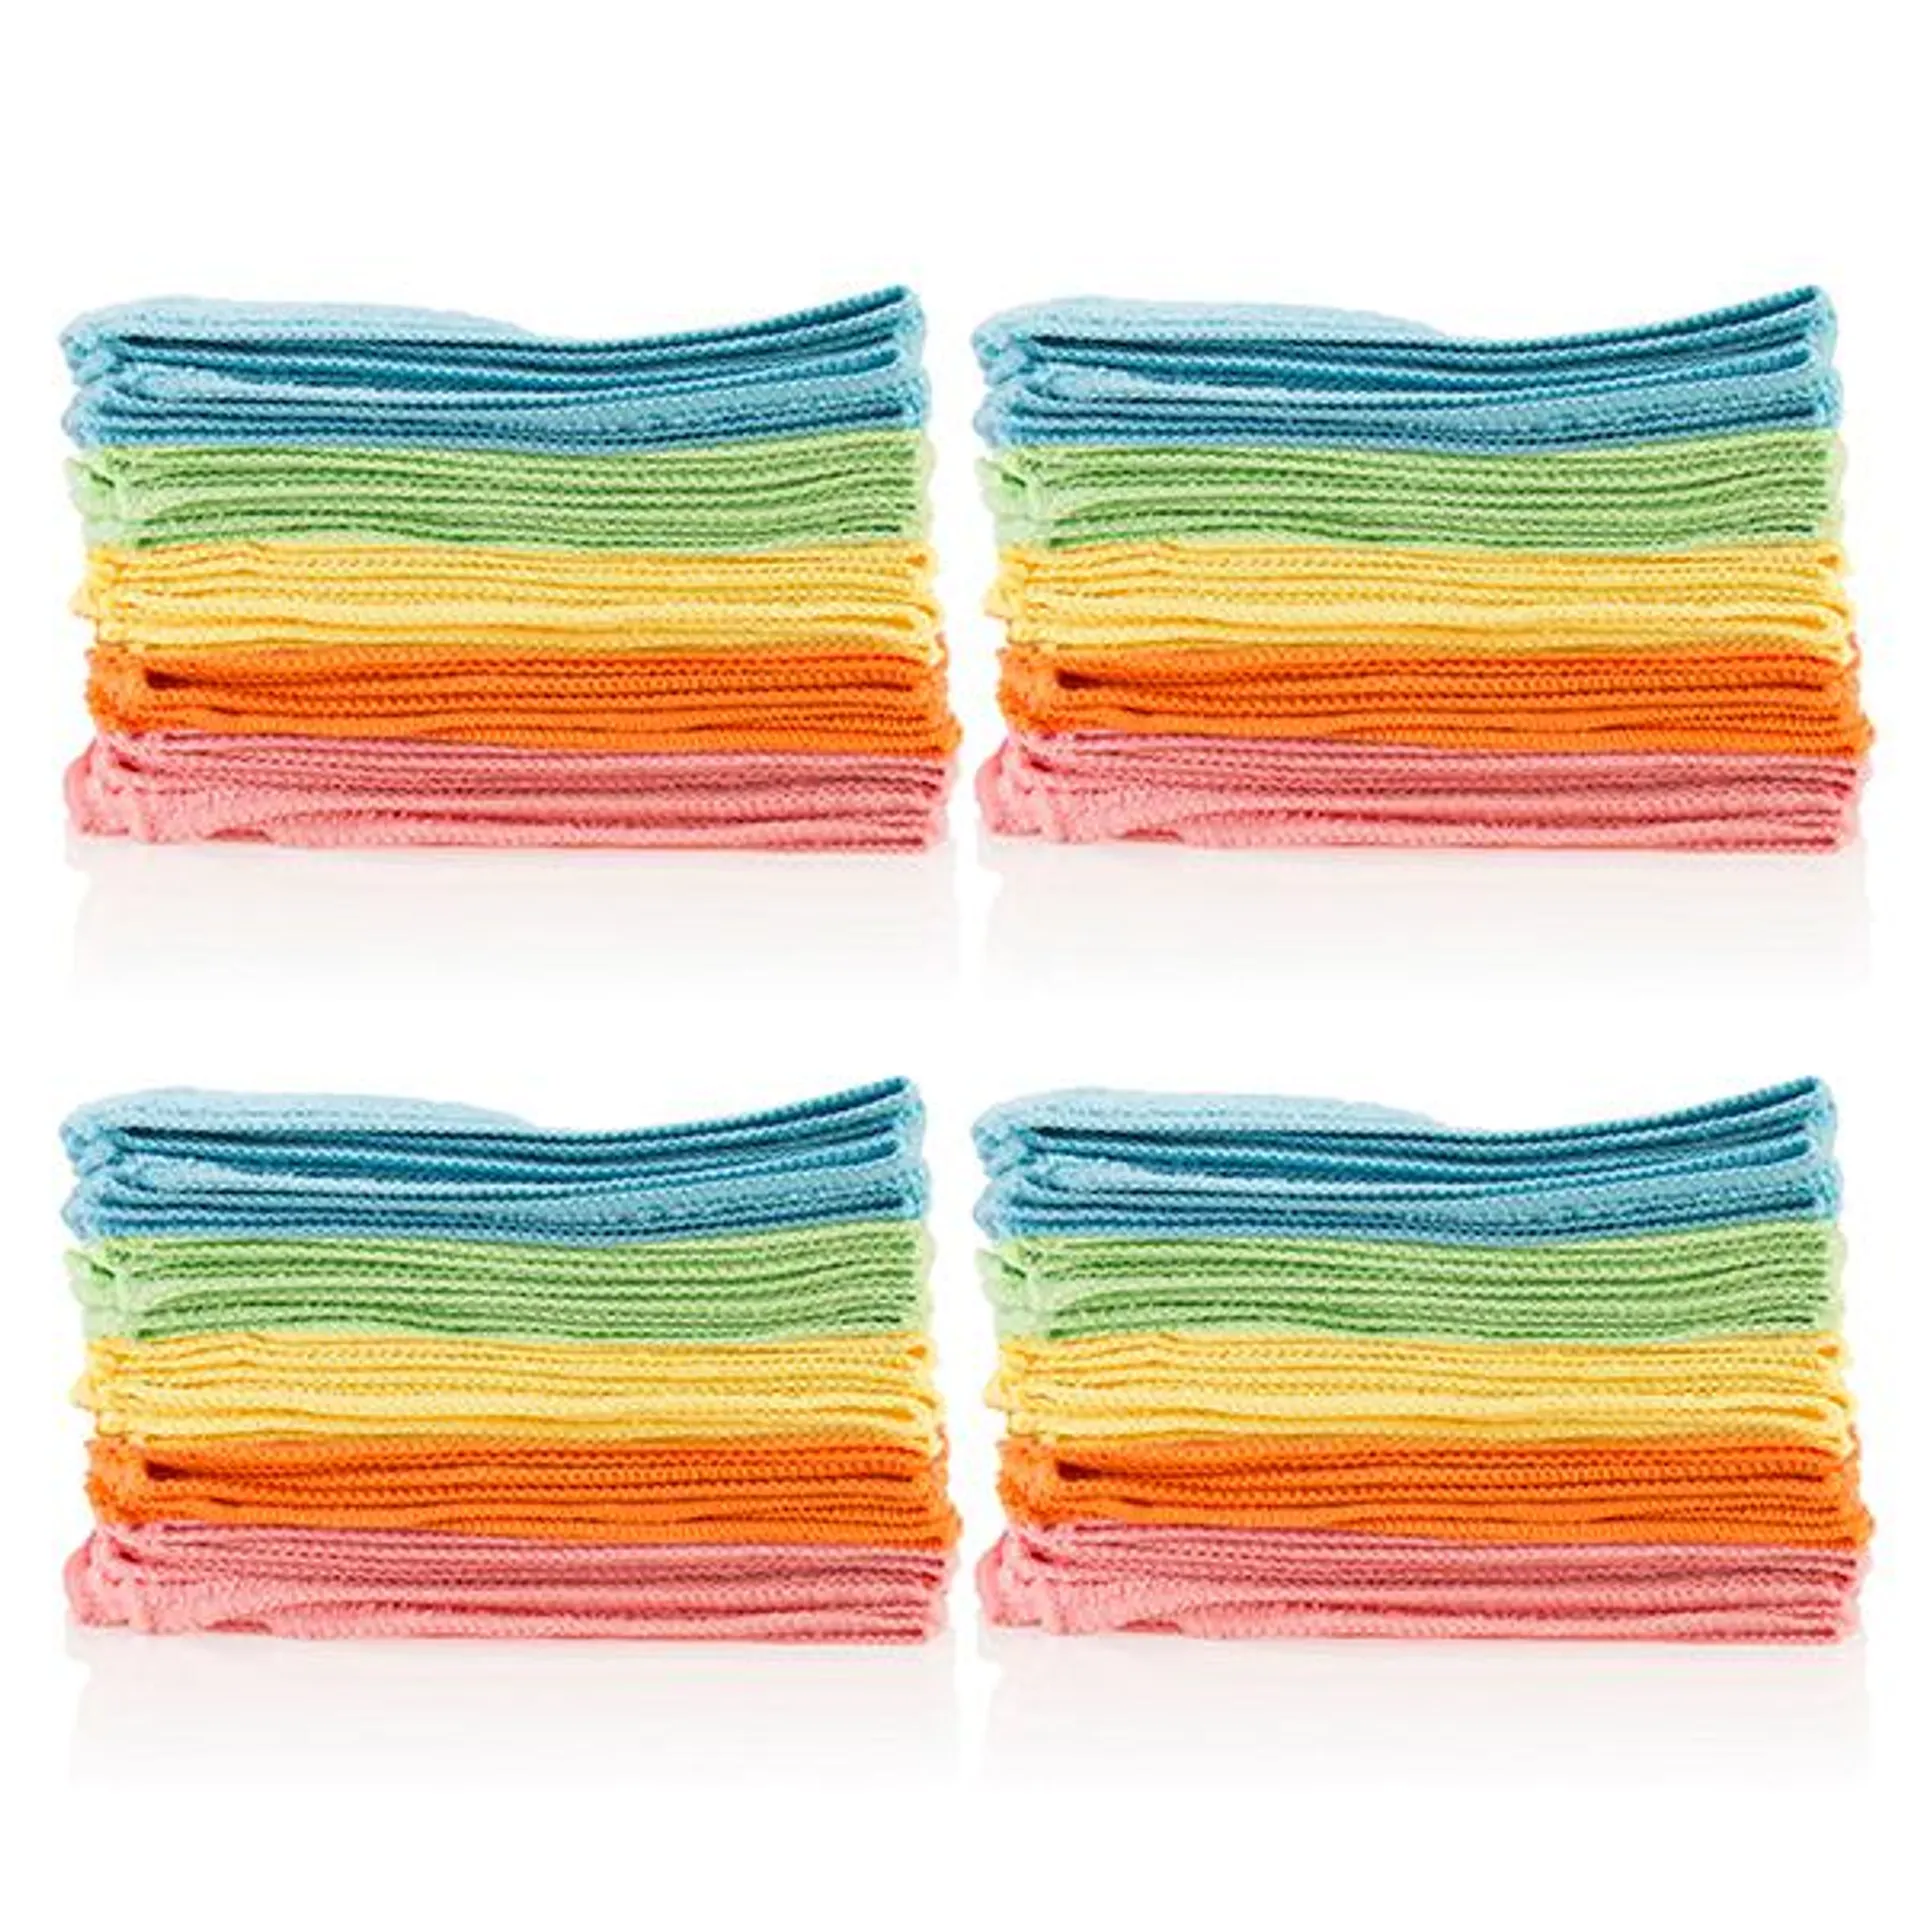 Microfibre Cloths - Pack of 40